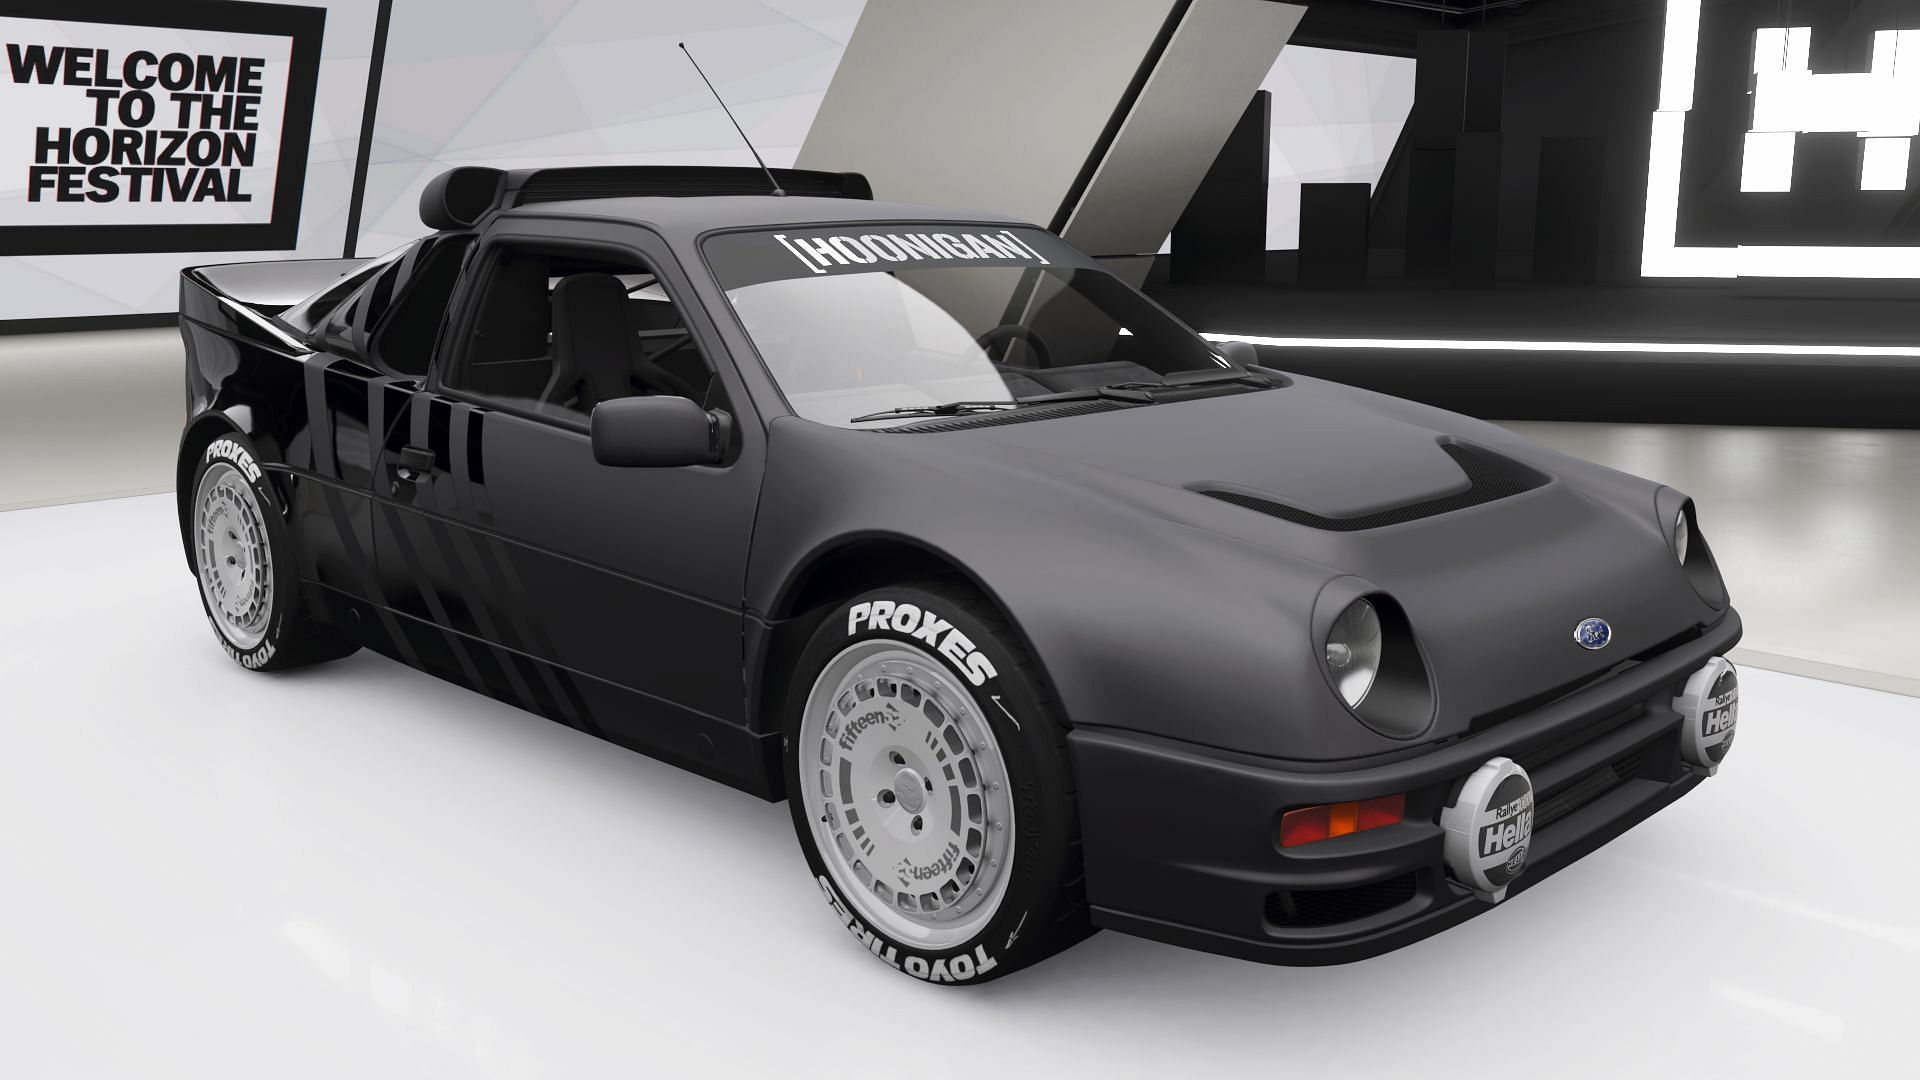 1986 Hoonigan Ford RS200 Evolution in Forza Horizon 5 (Image via Playground Games)